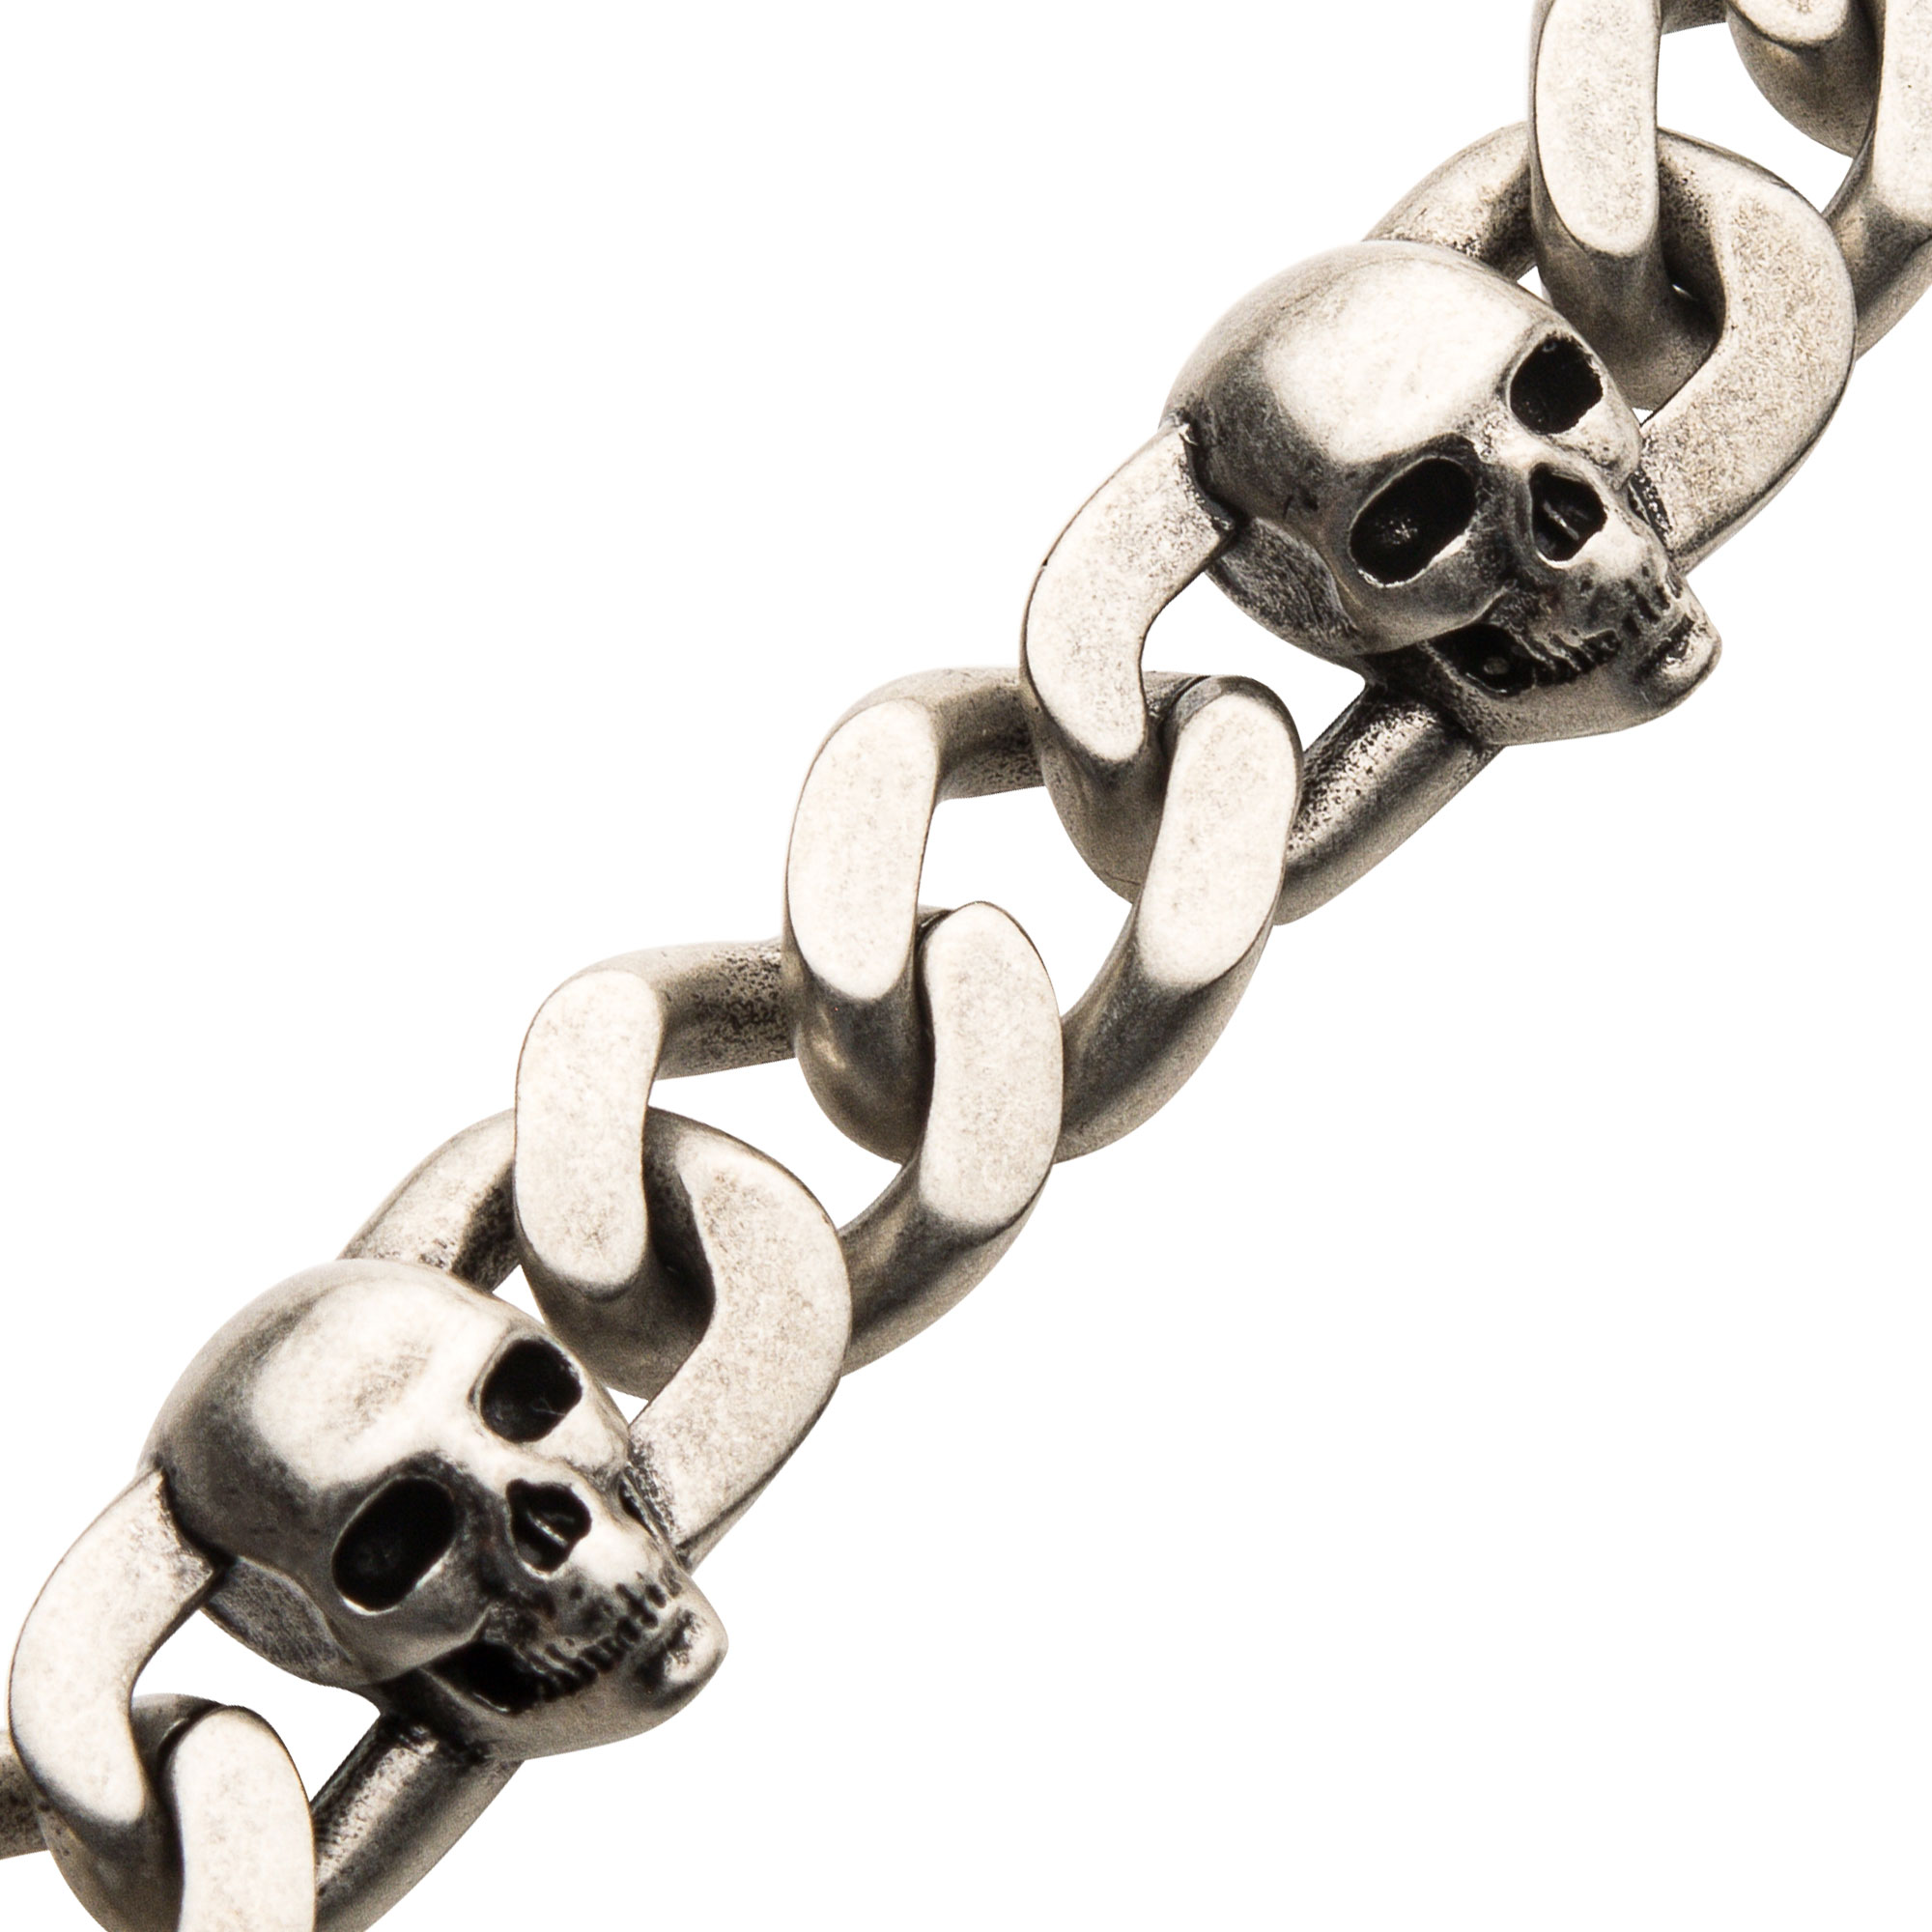 Stainless Steel Silver Plated with Skull Design Chunky Chain Bracelet Image 3 Ken Walker Jewelers Gig Harbor, WA